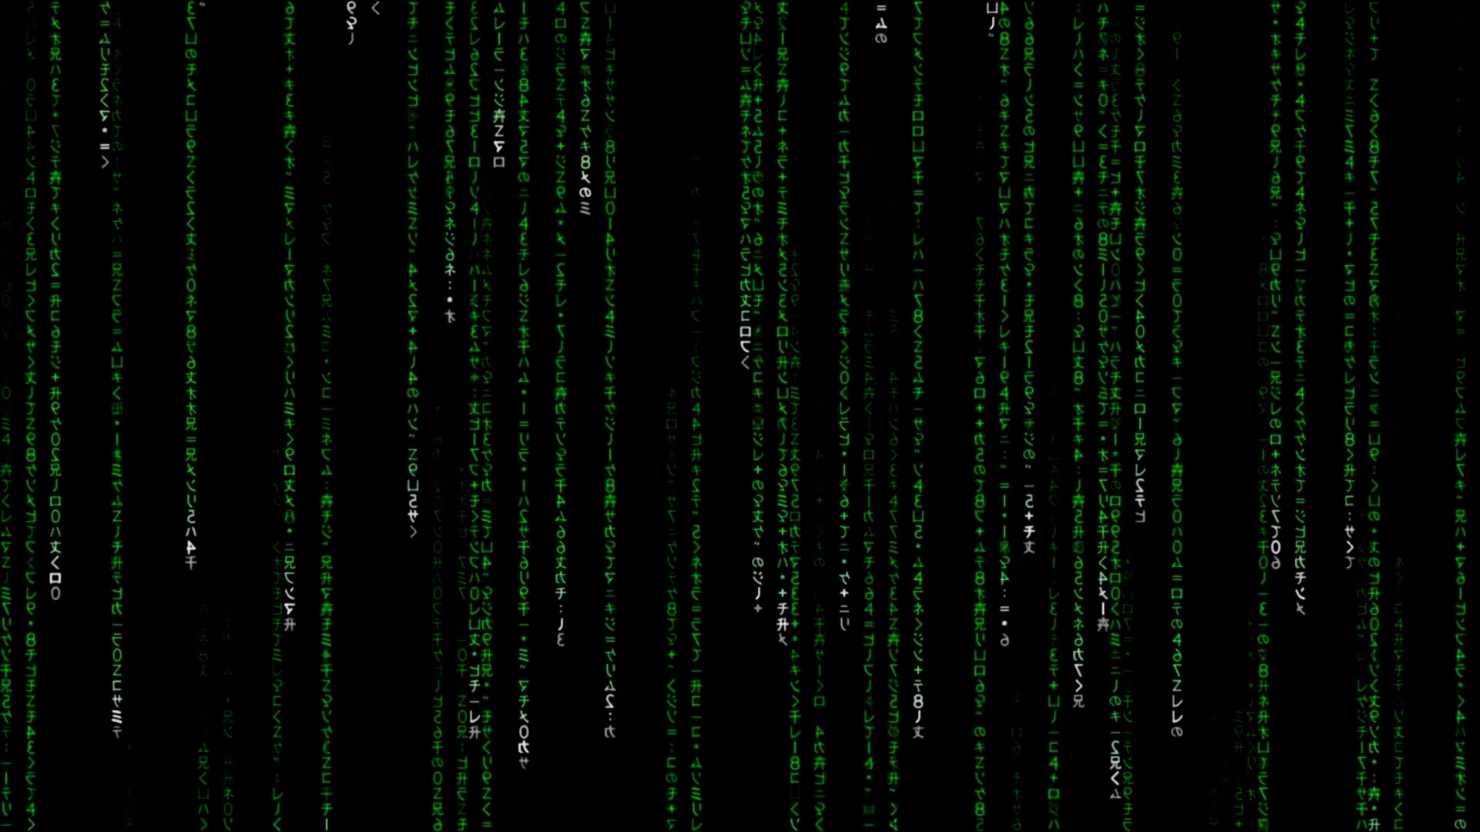 Matrix-Code-Animated-HD-Wallpaper by SmithJerry on DeviantArt